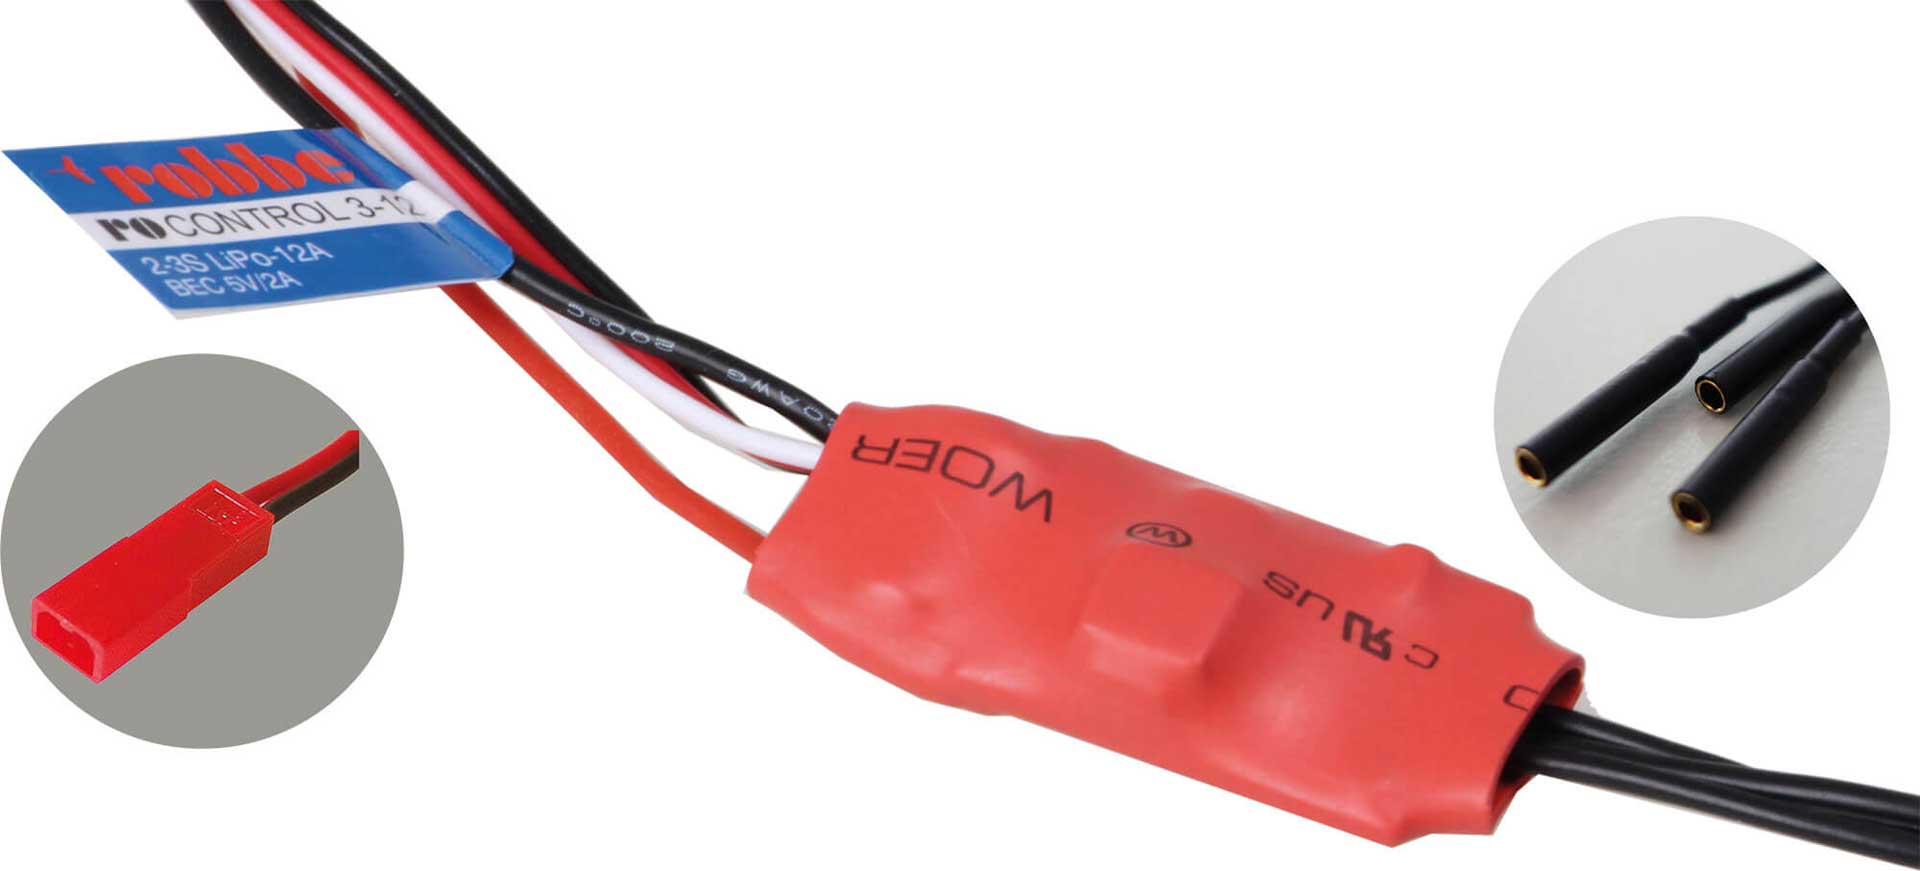 Robbe Modellsport RO-CONTROL 3-12 2-3S -12(15)A BRUSHLESS CONTROLLER 5V/2A BEC